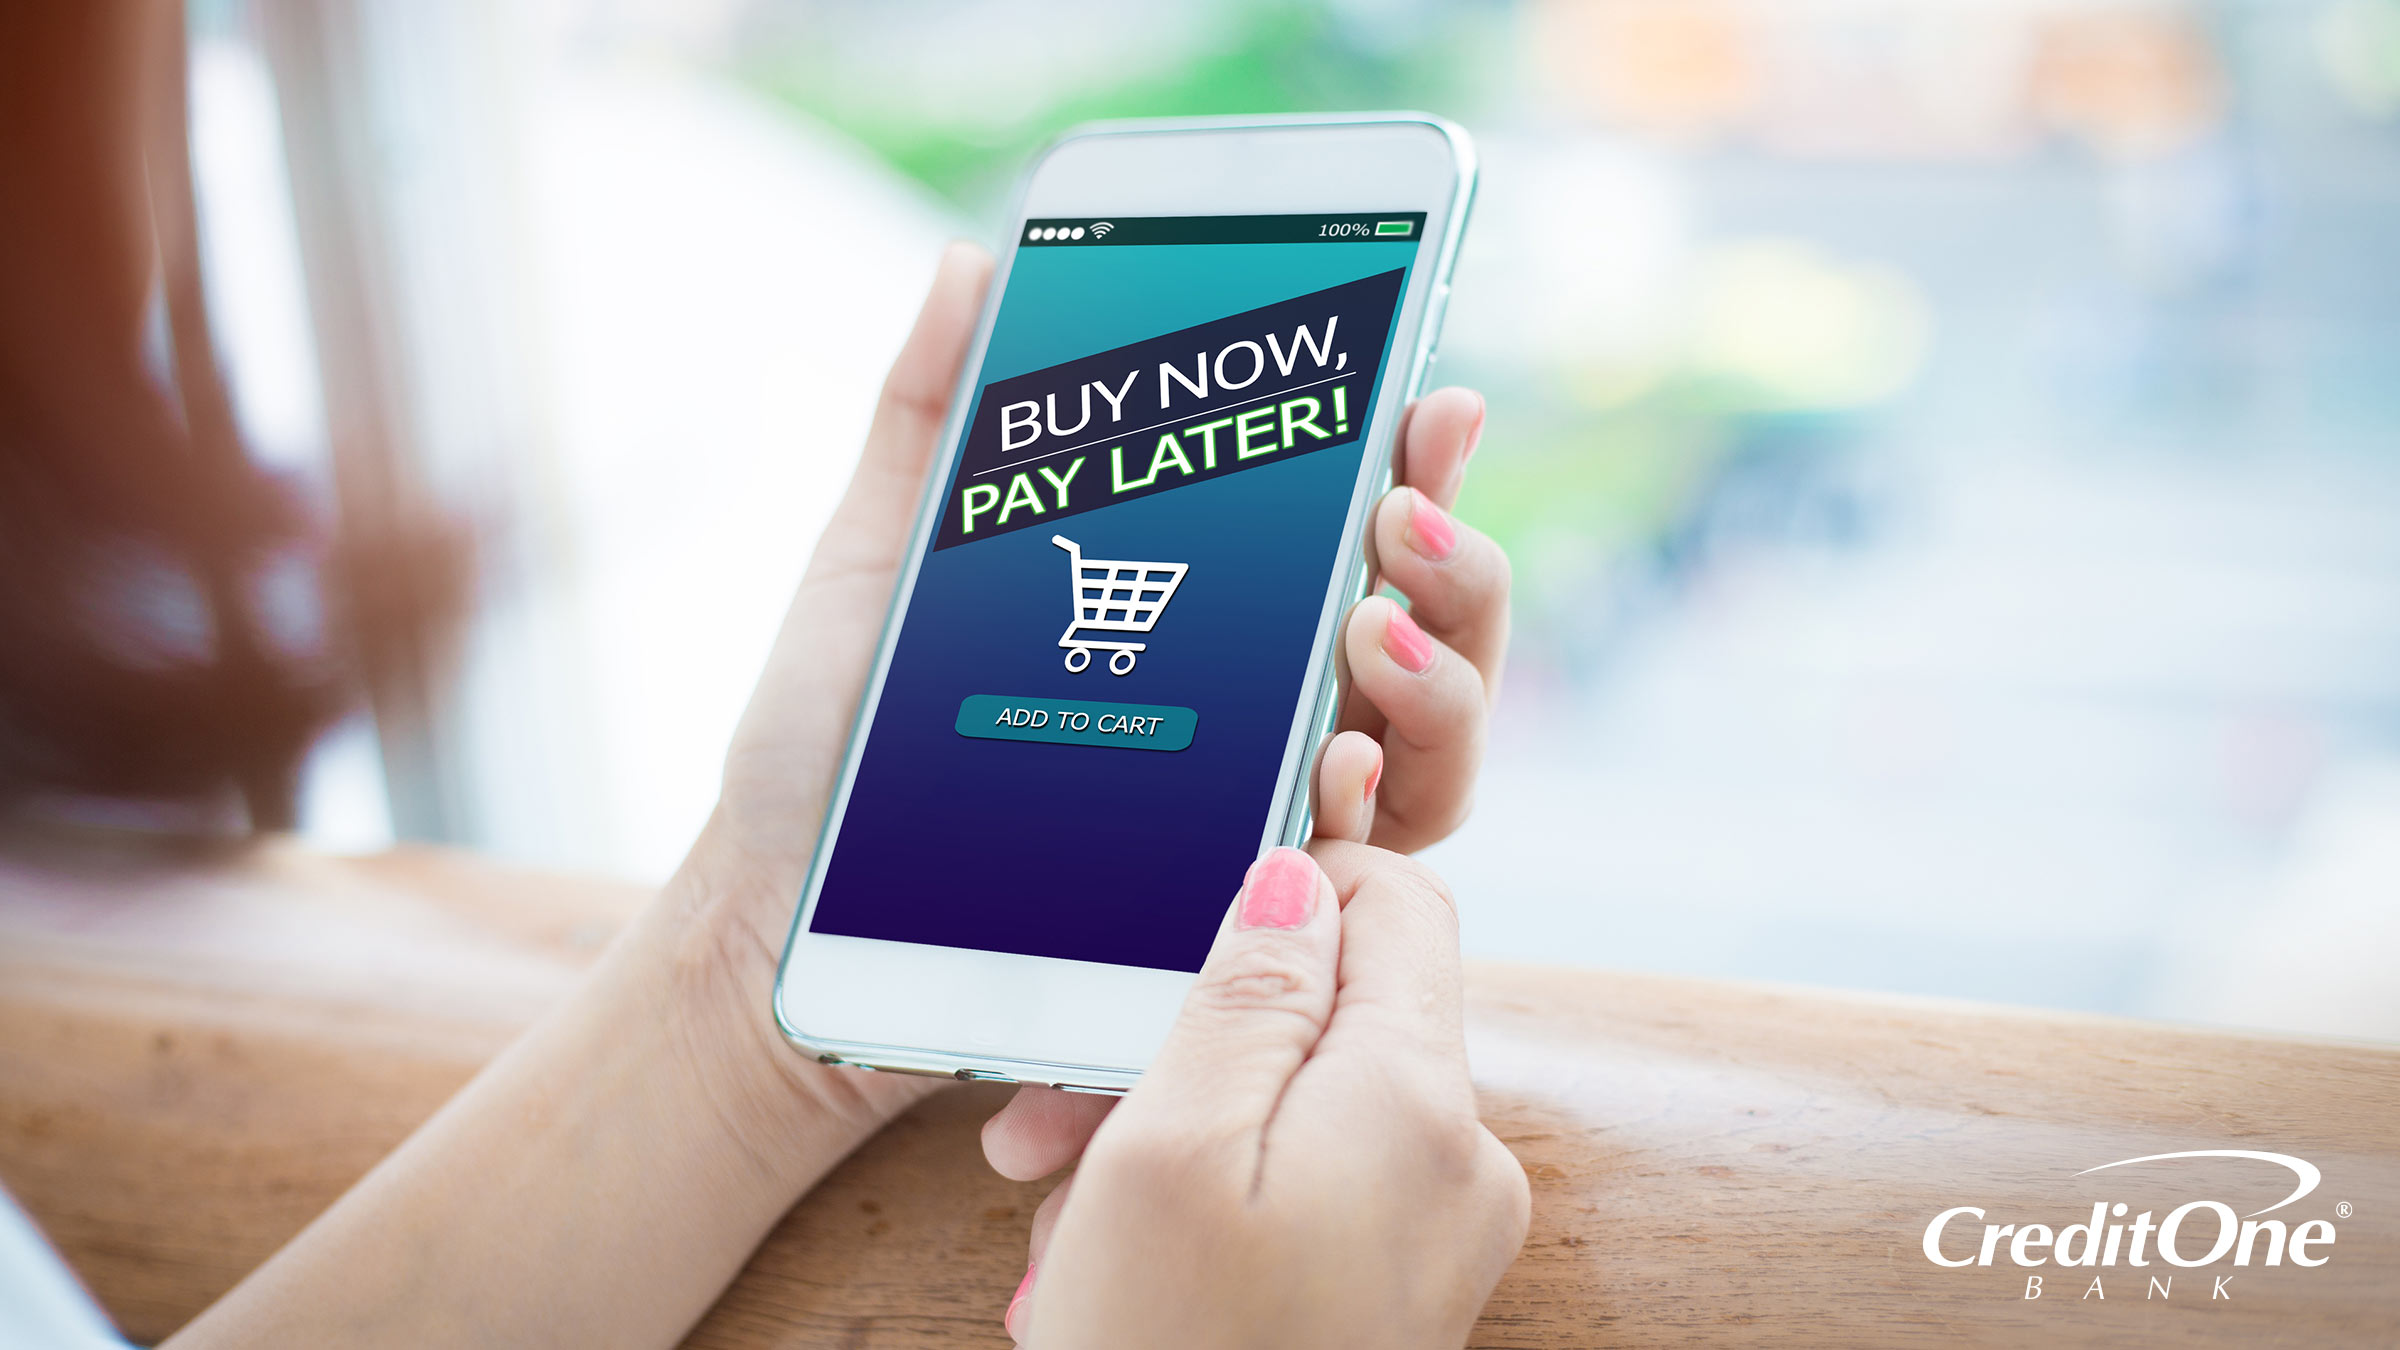 What Does Buy Now, Pay Later Mean?